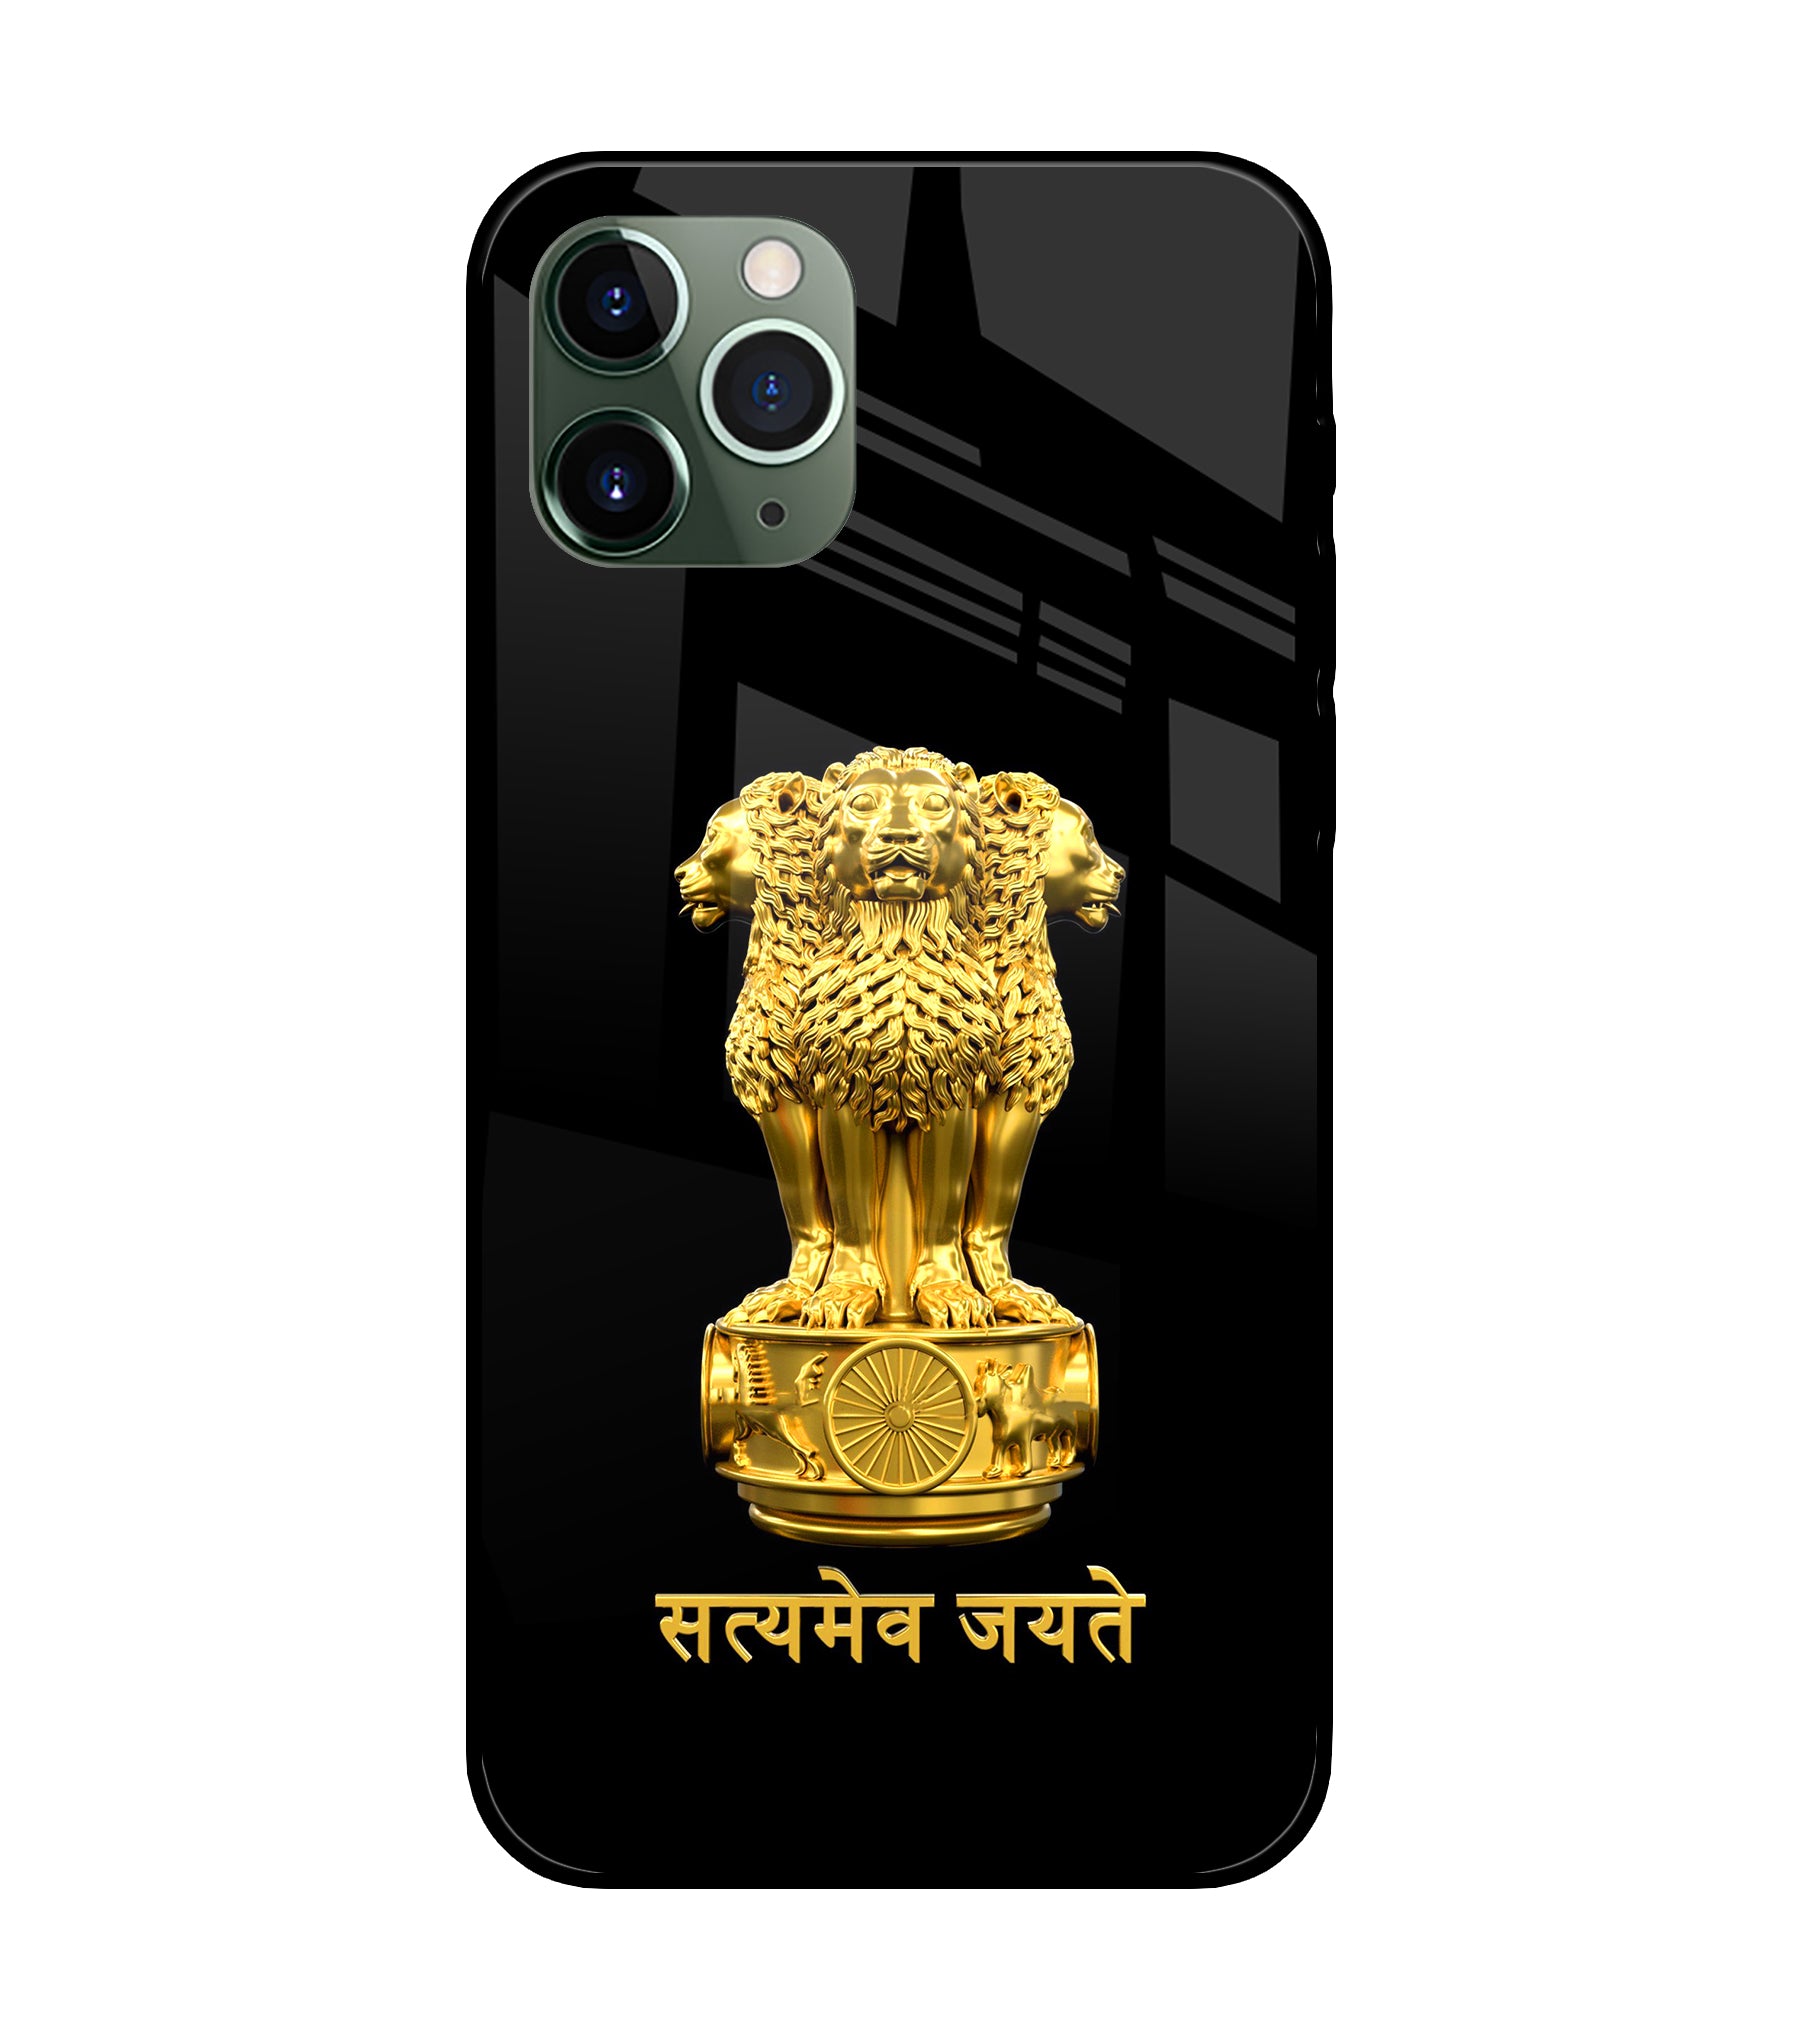 Satyamev Jayate Golden iPhone 11 Pro Max Glass Cover